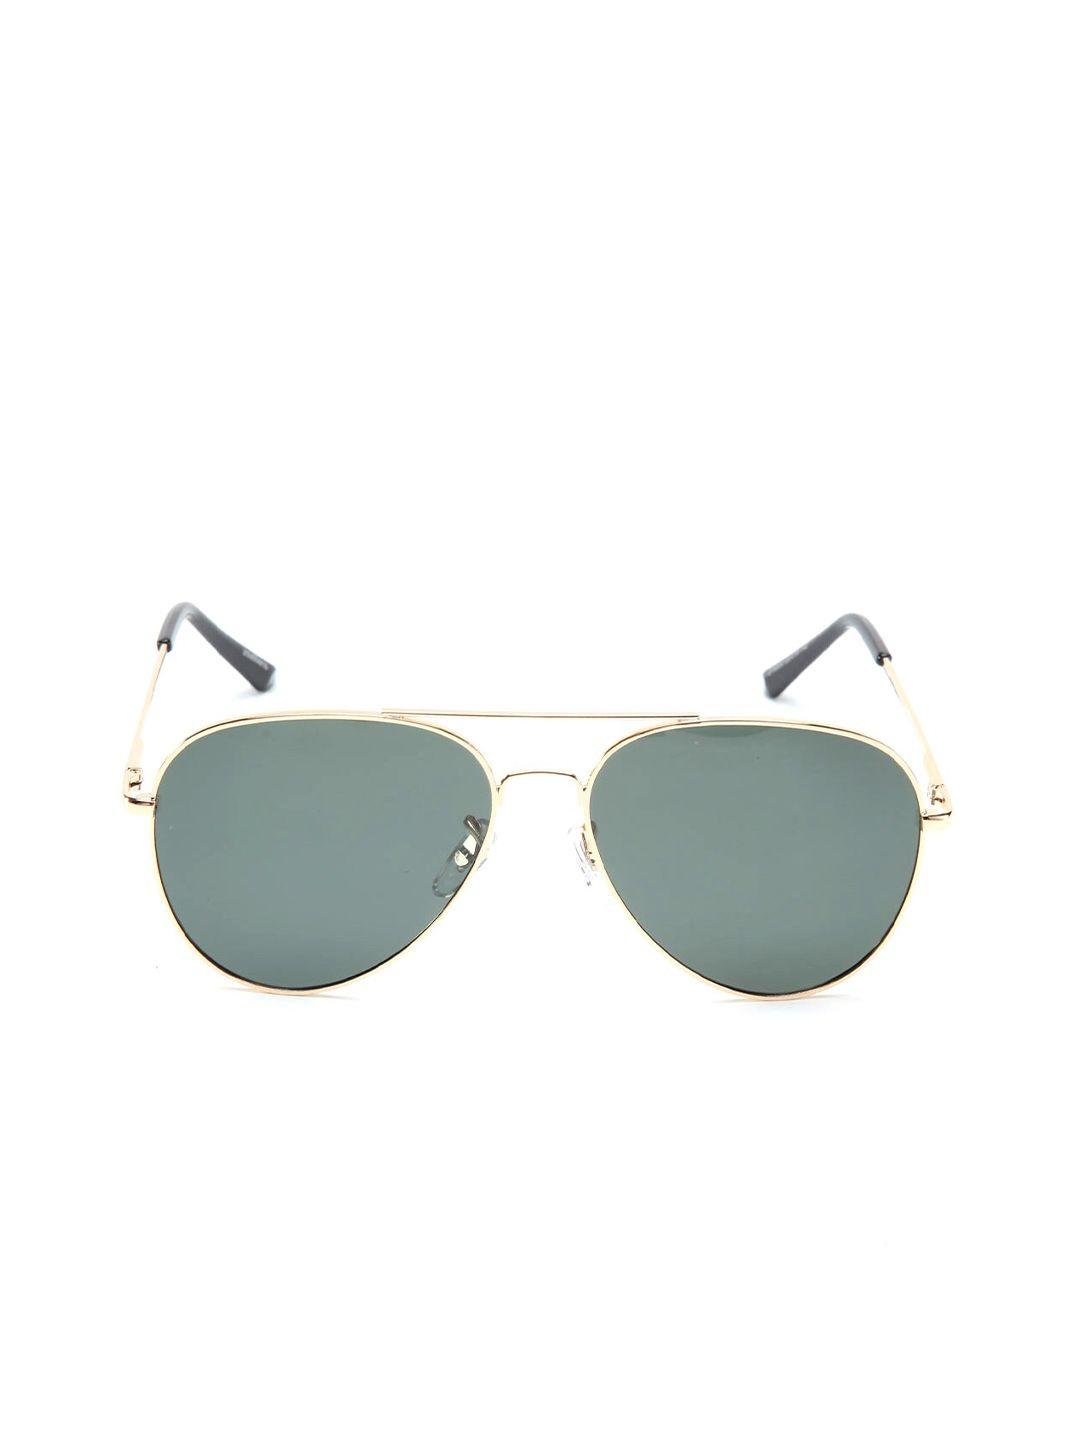 intellilens unisex green lens & gold-toned aviator sunglasses with polarised and uv protected lens 1000000060920